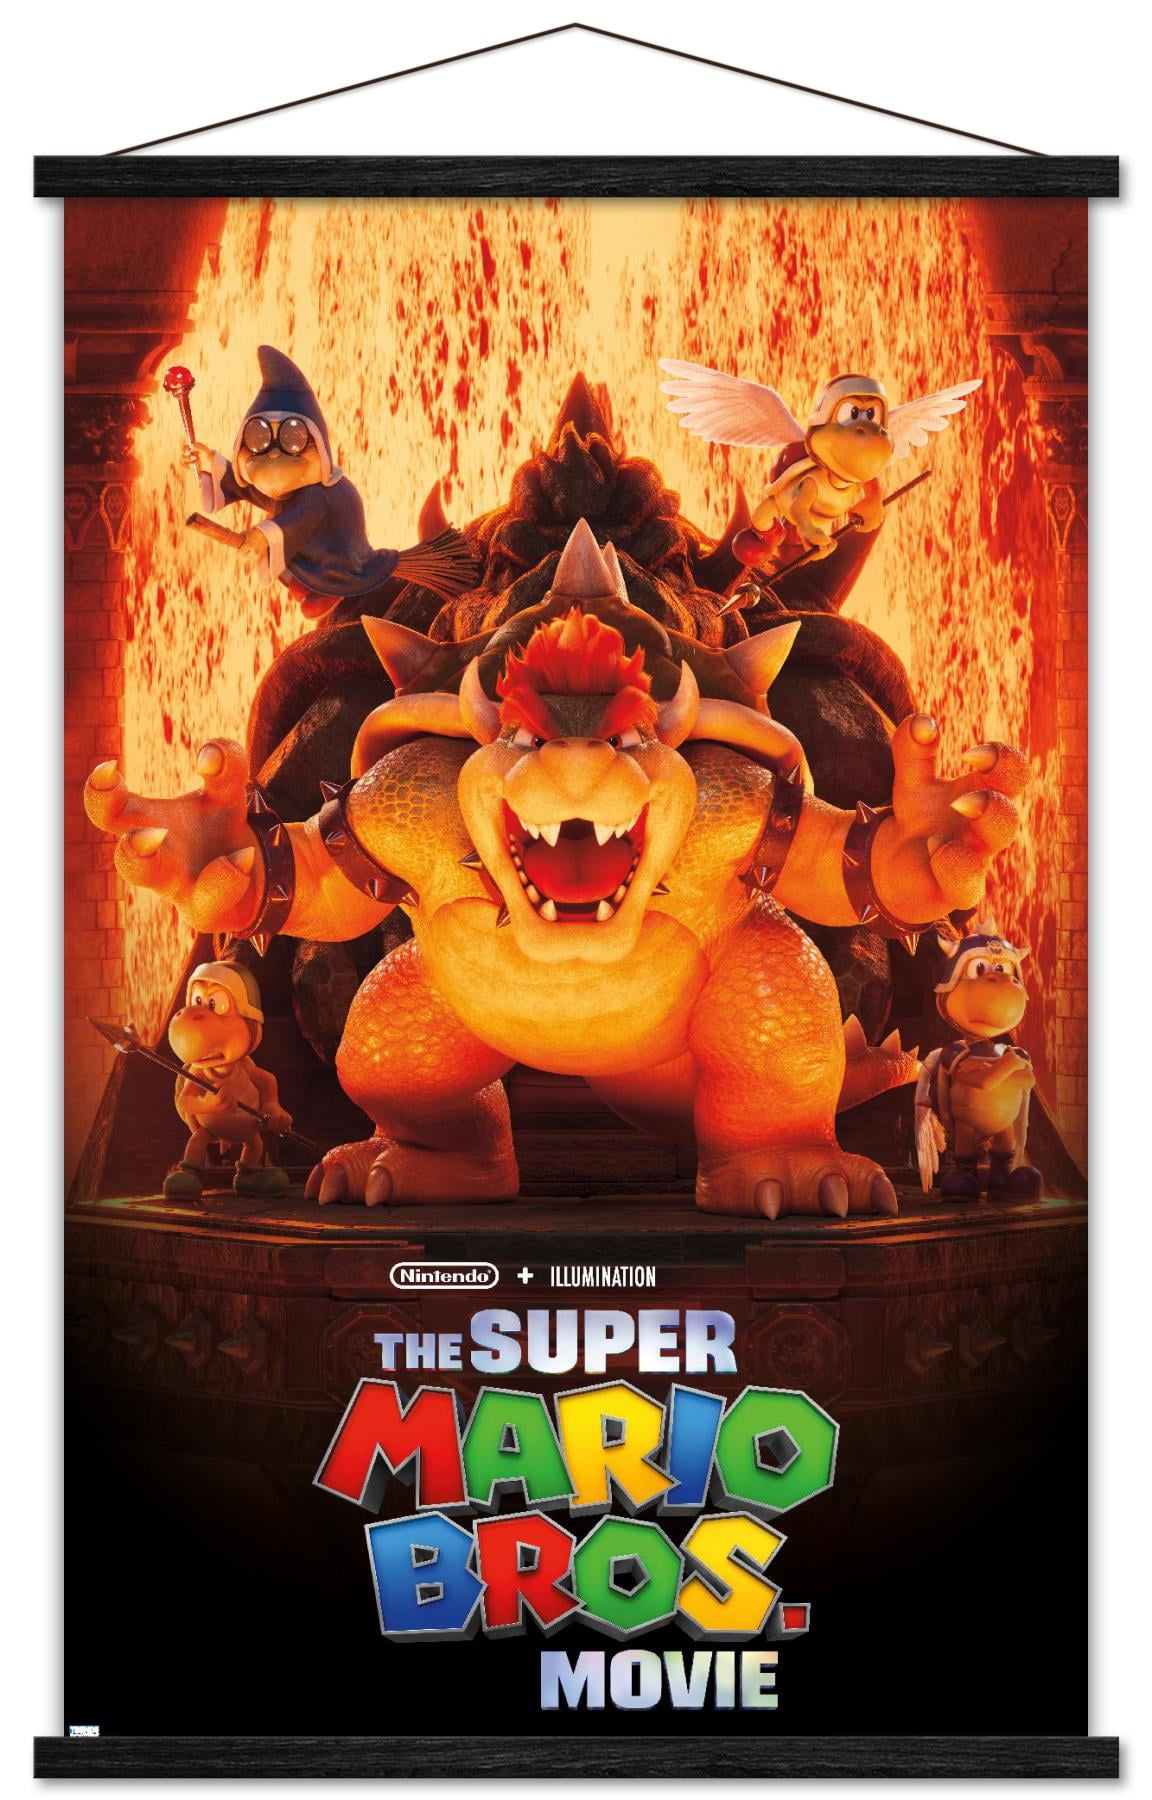 The Super Mario Bros. Movie - Bowser's World Key Art Wall Poster, 14.725 x  22.375 Framed 